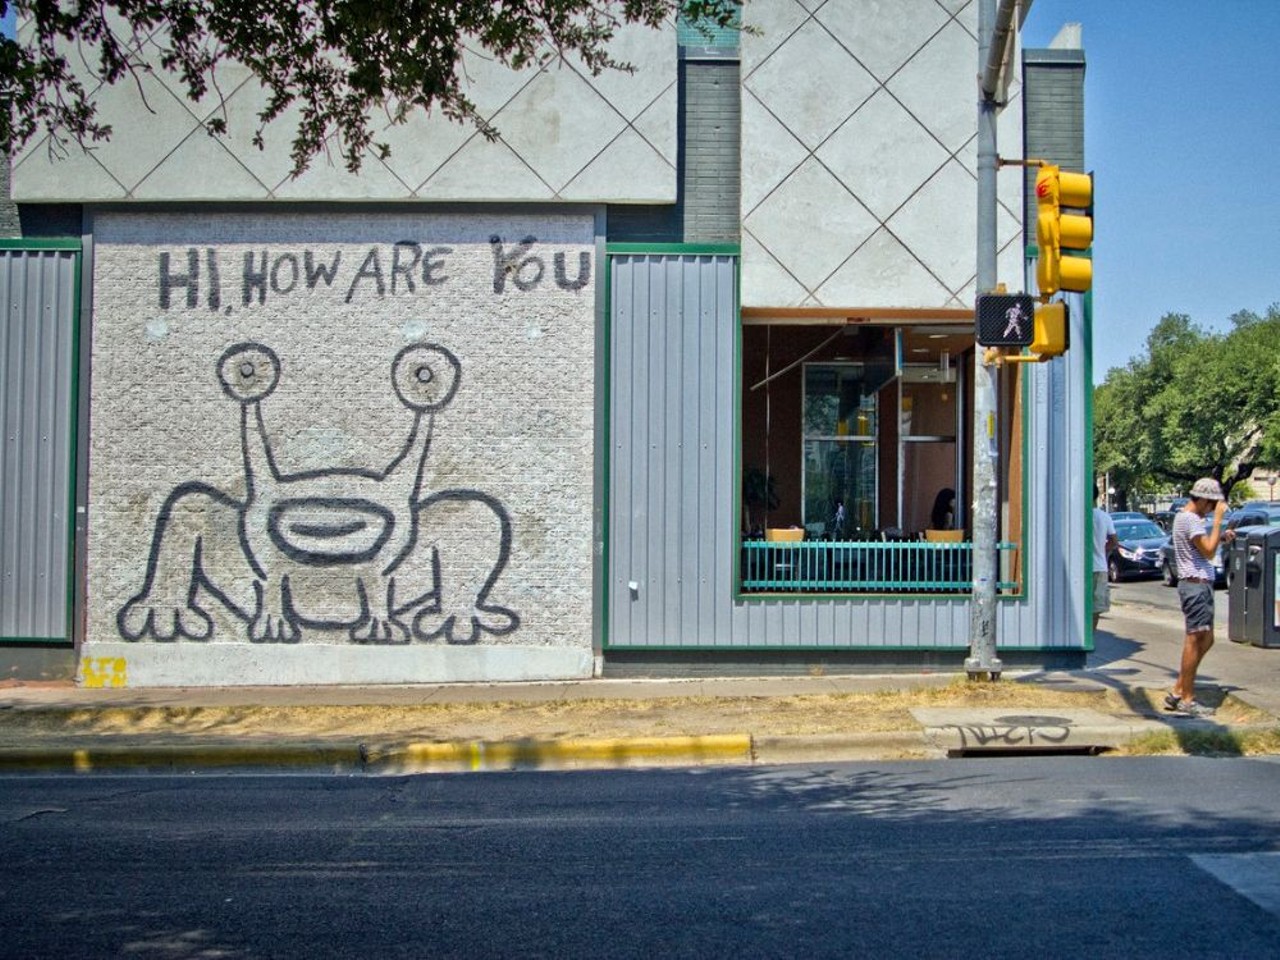 Hi, How Are You
Intersection of W. 21st and Guadalupe Streets, Austin
Also called "Jeremiah the Innocent," Daniel Johnston's iconic 1993 mural was originally painted on the side of Austin's Sound Exchange music store. In 2023, developers demolished the building on which the mural was painted, but left it standing and promised to preserve the artwork.